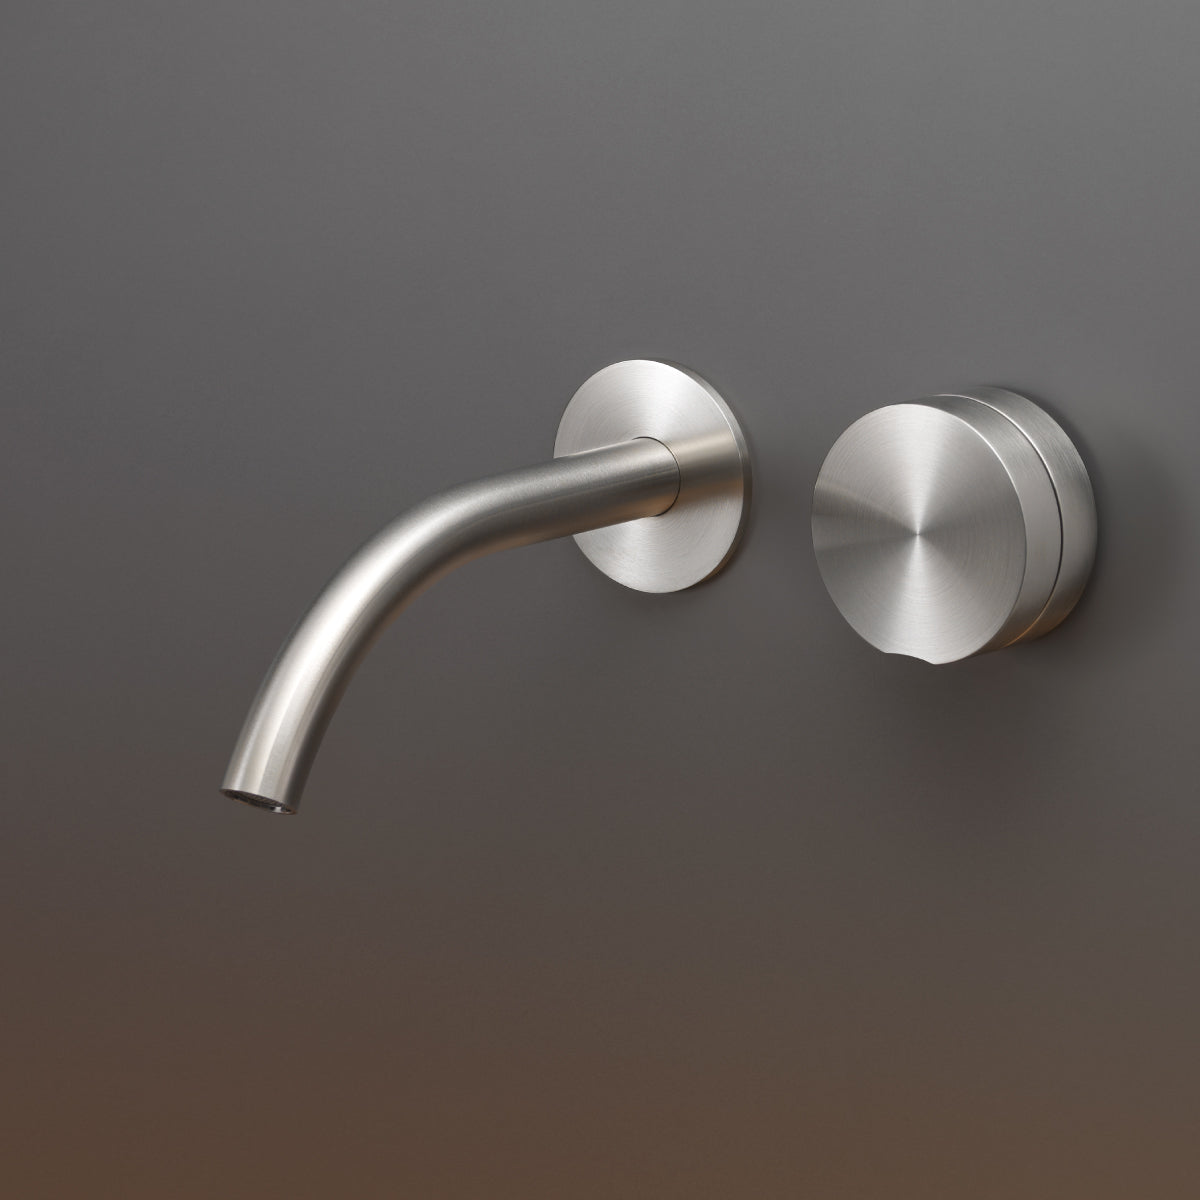 GIO71 I wall mounted faucet by CEA Design - $2,569.00 - $2,614.00